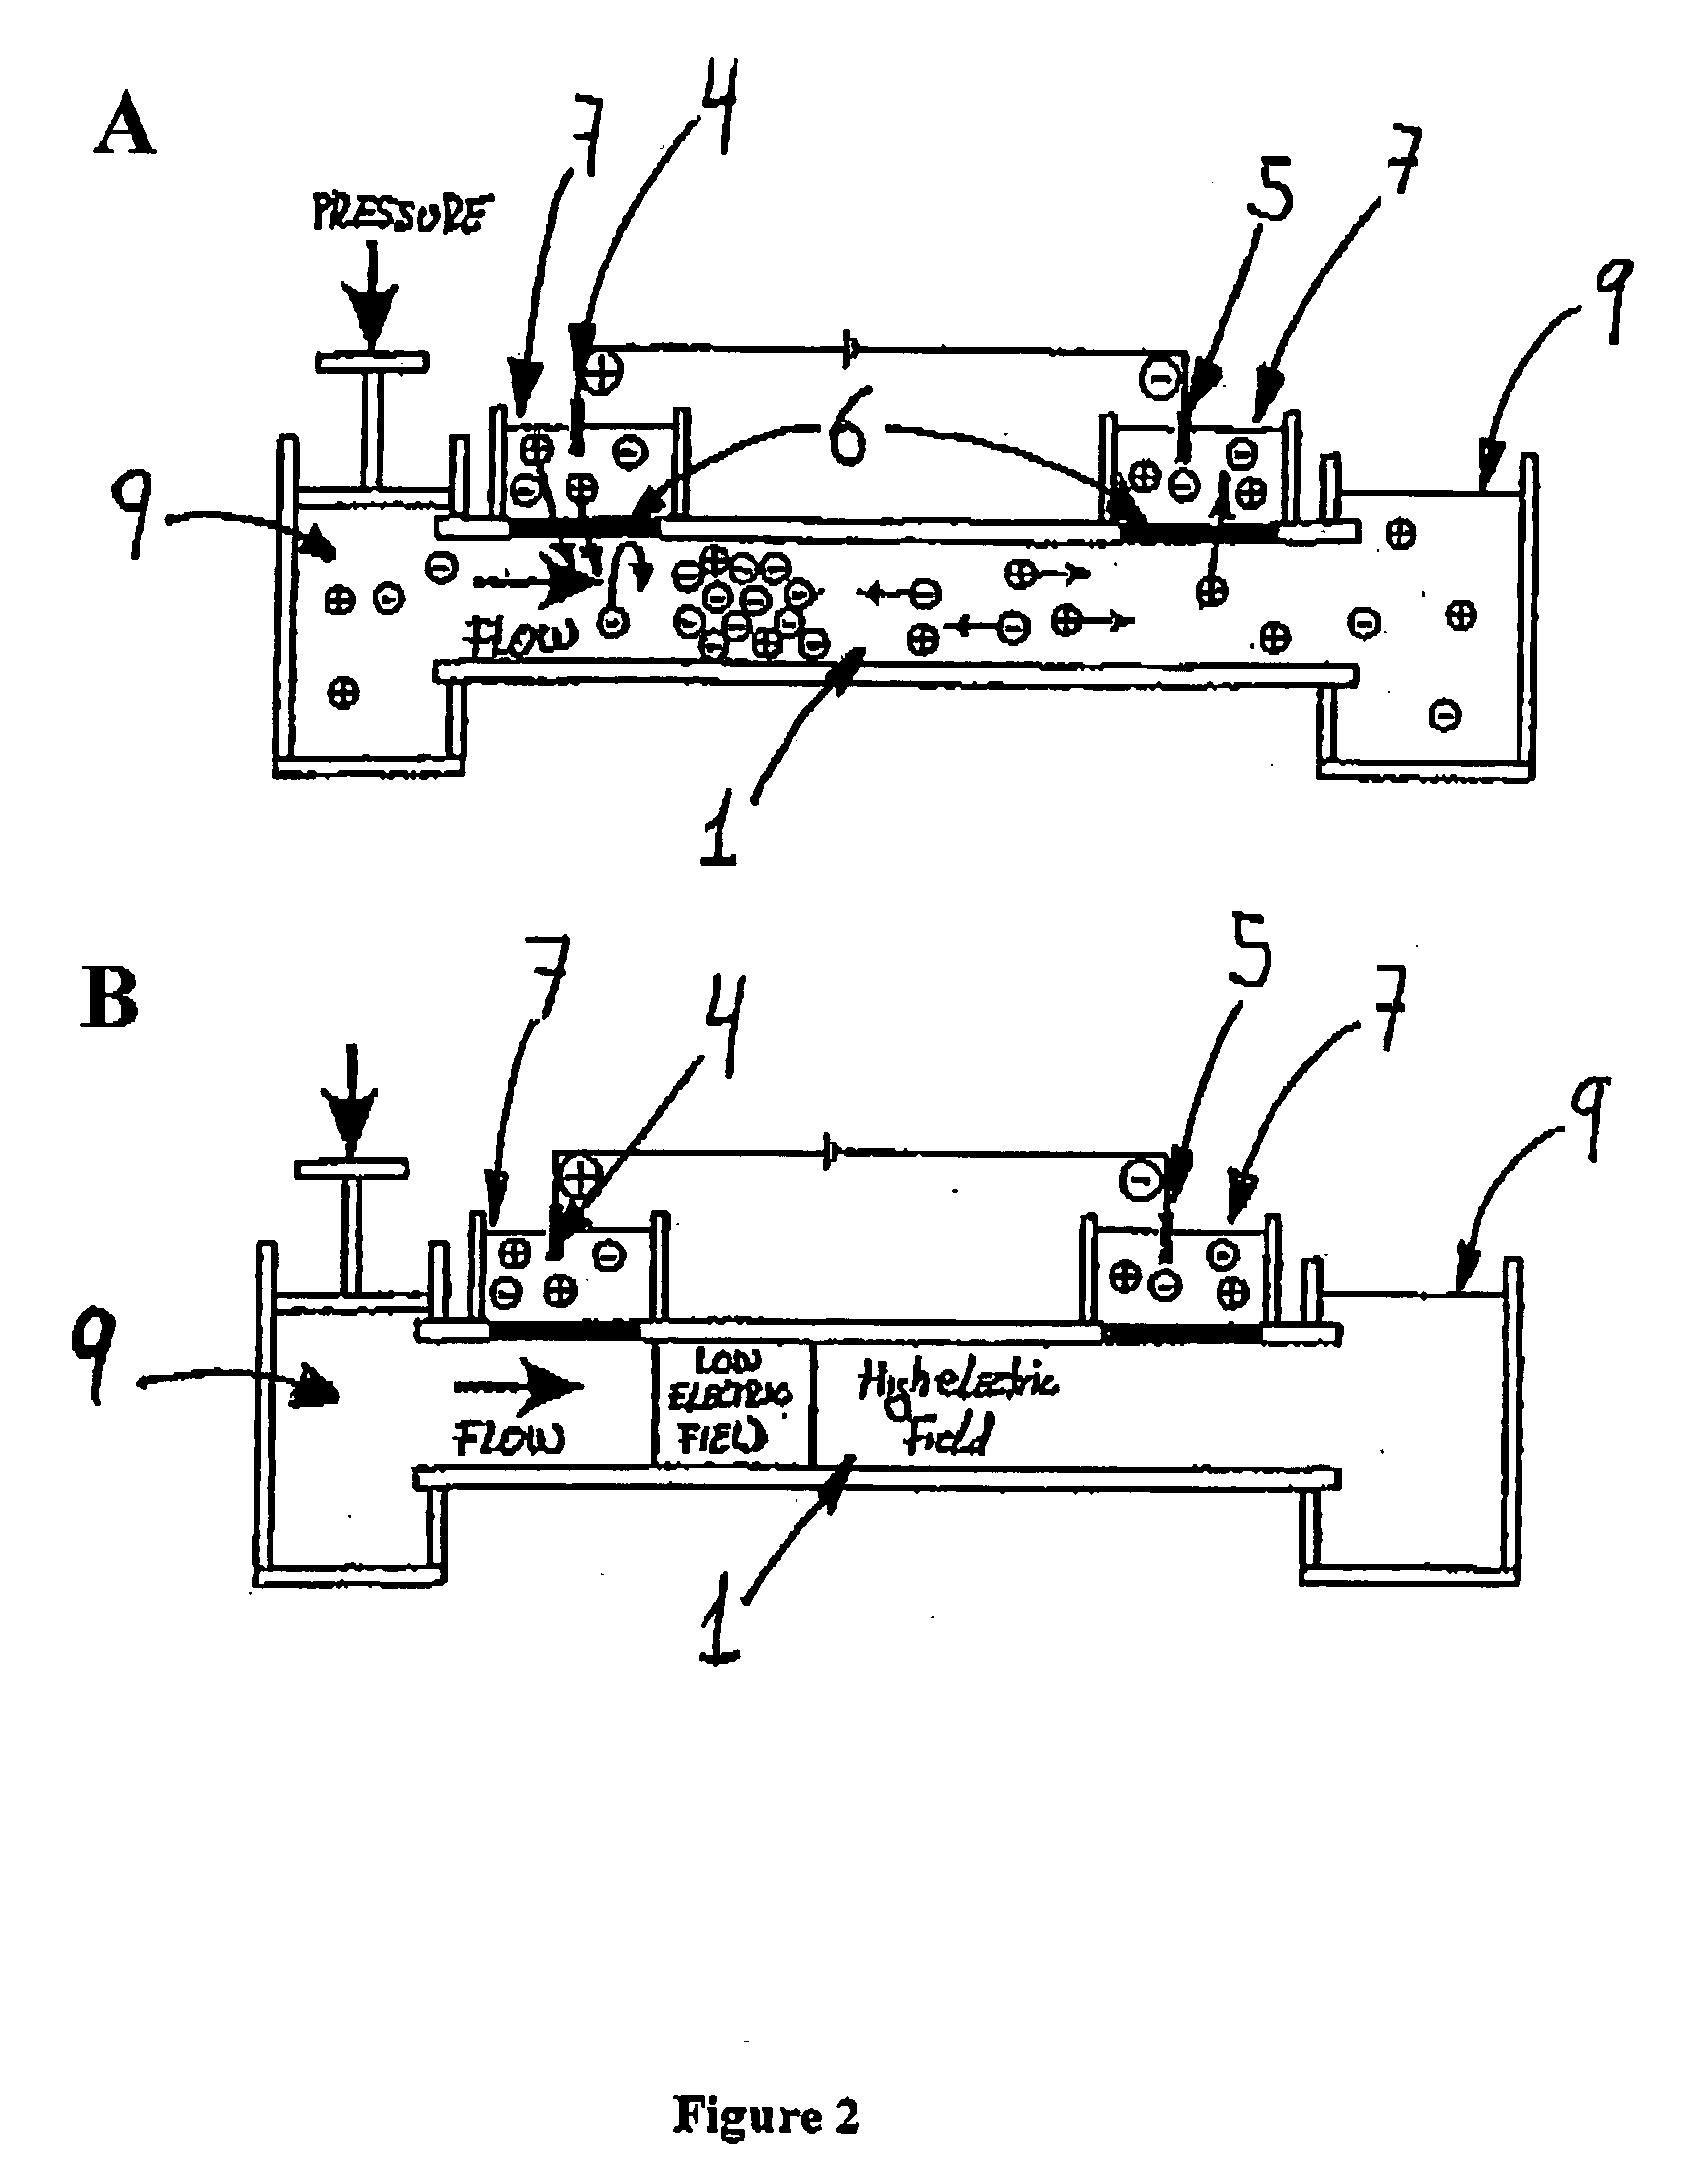 Method and device for capturing charged molecules traveling in a flow stream